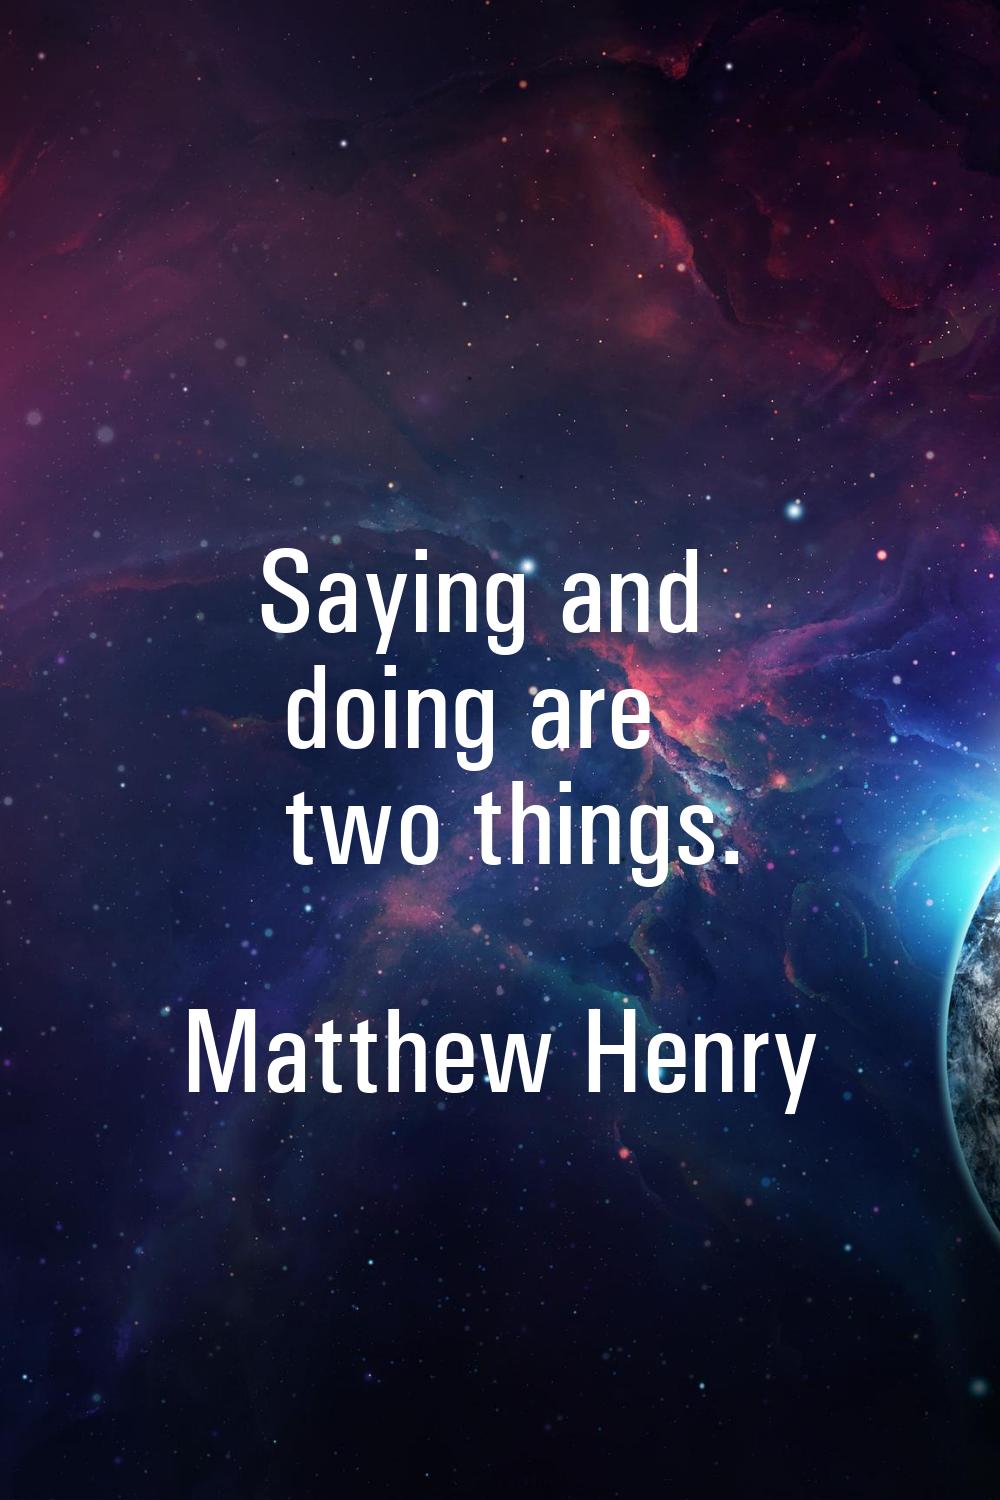 Saying and doing are two things.